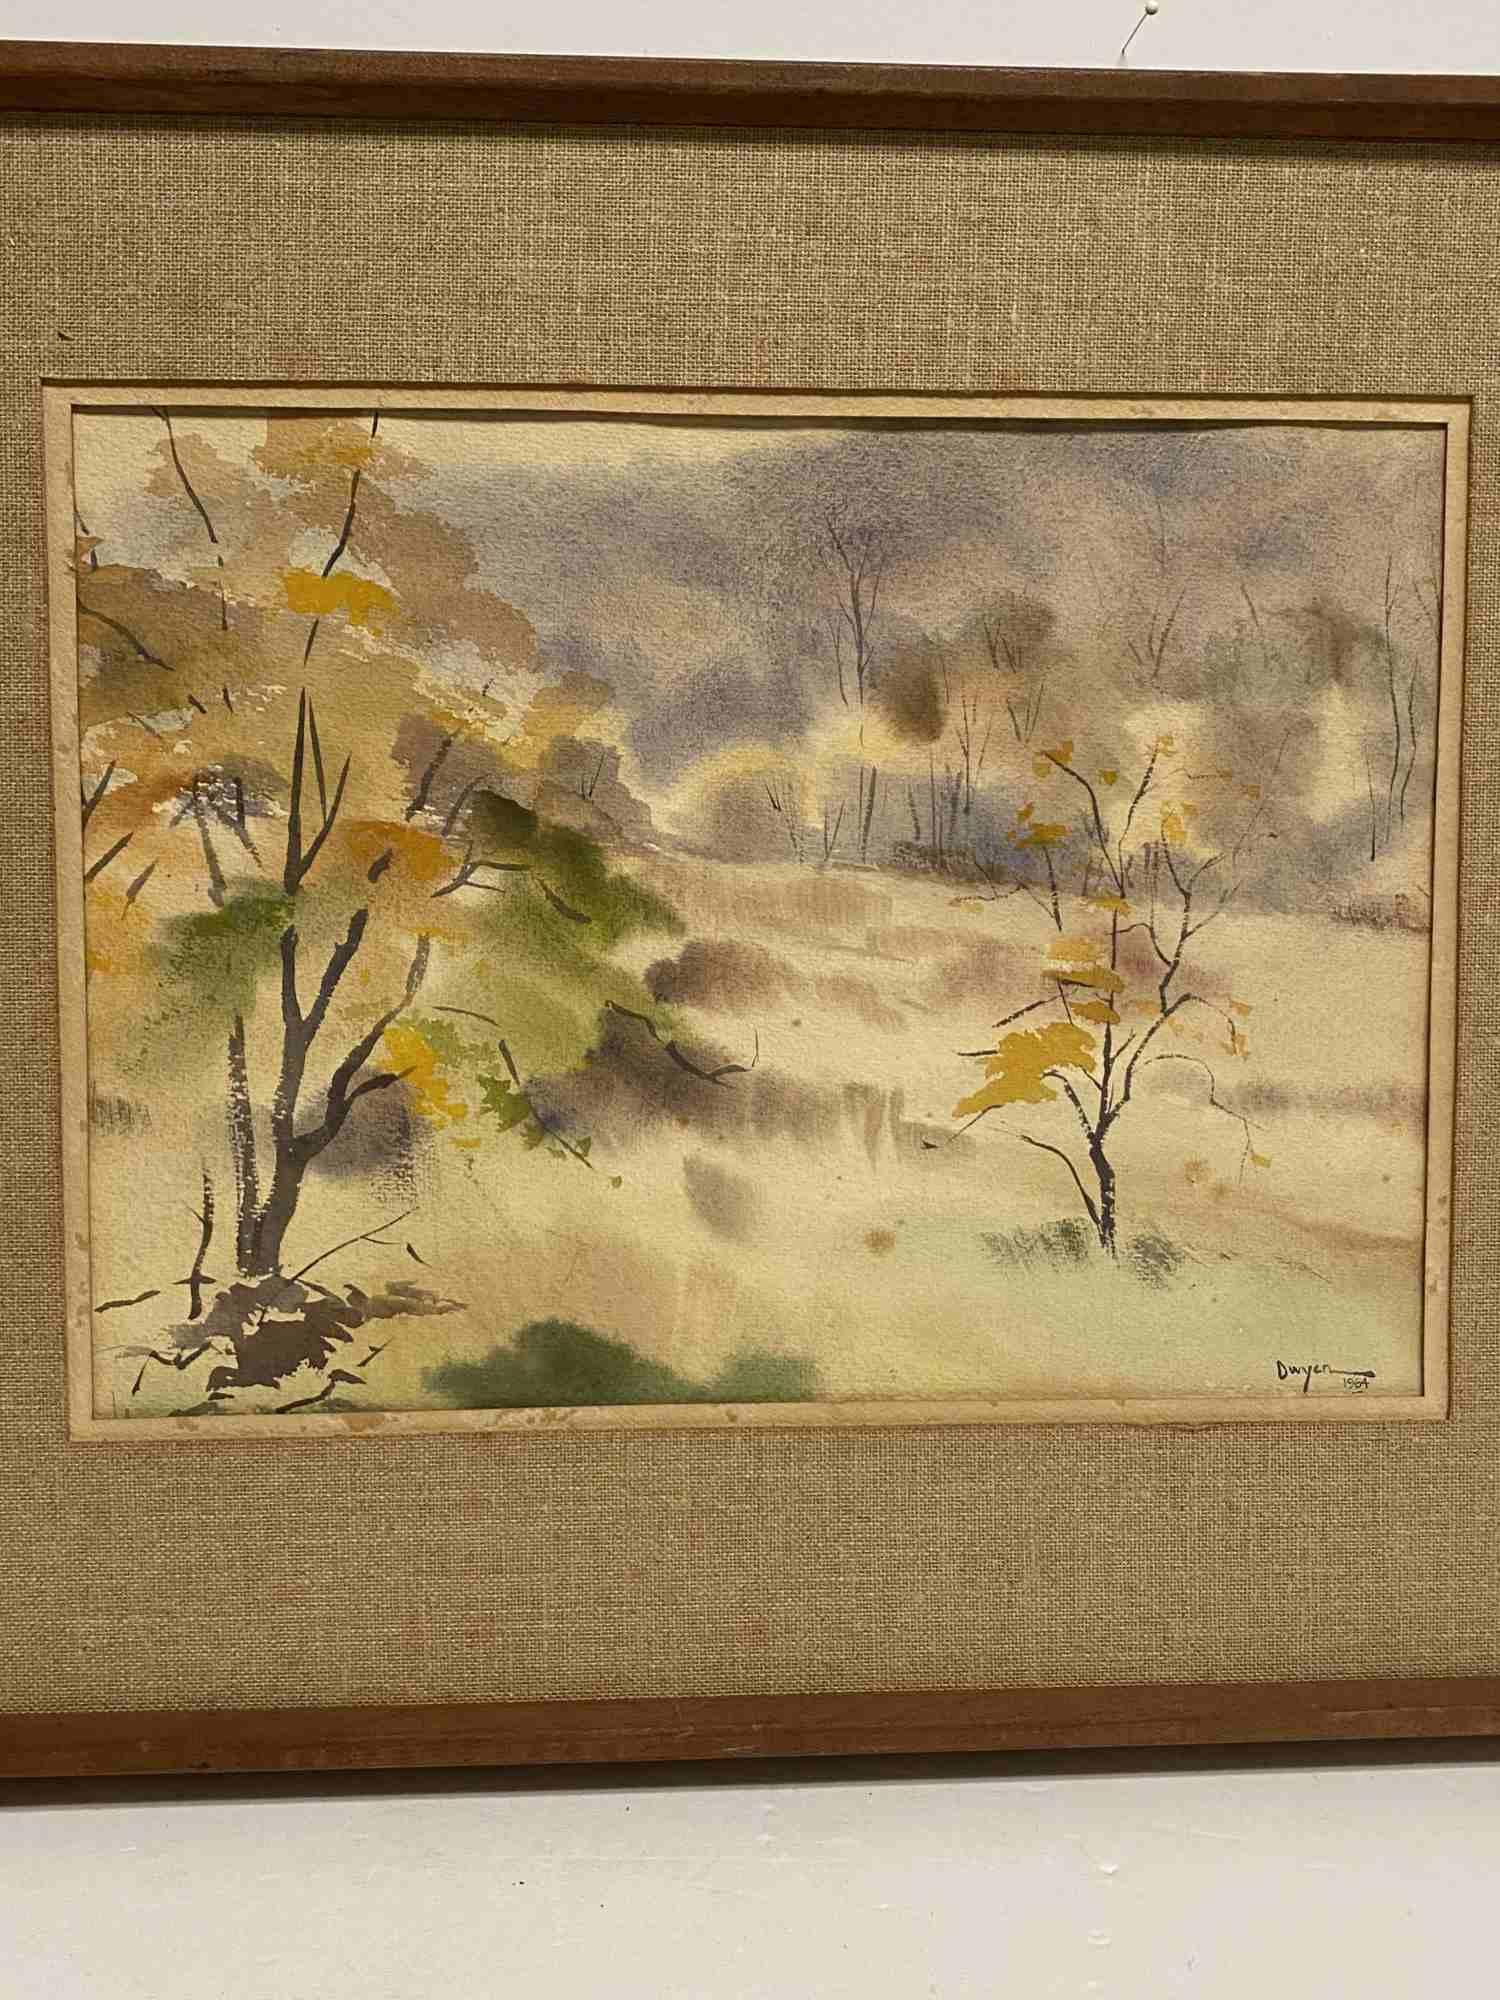 WATERCOLOR ON PAPER SIGNED DWYER